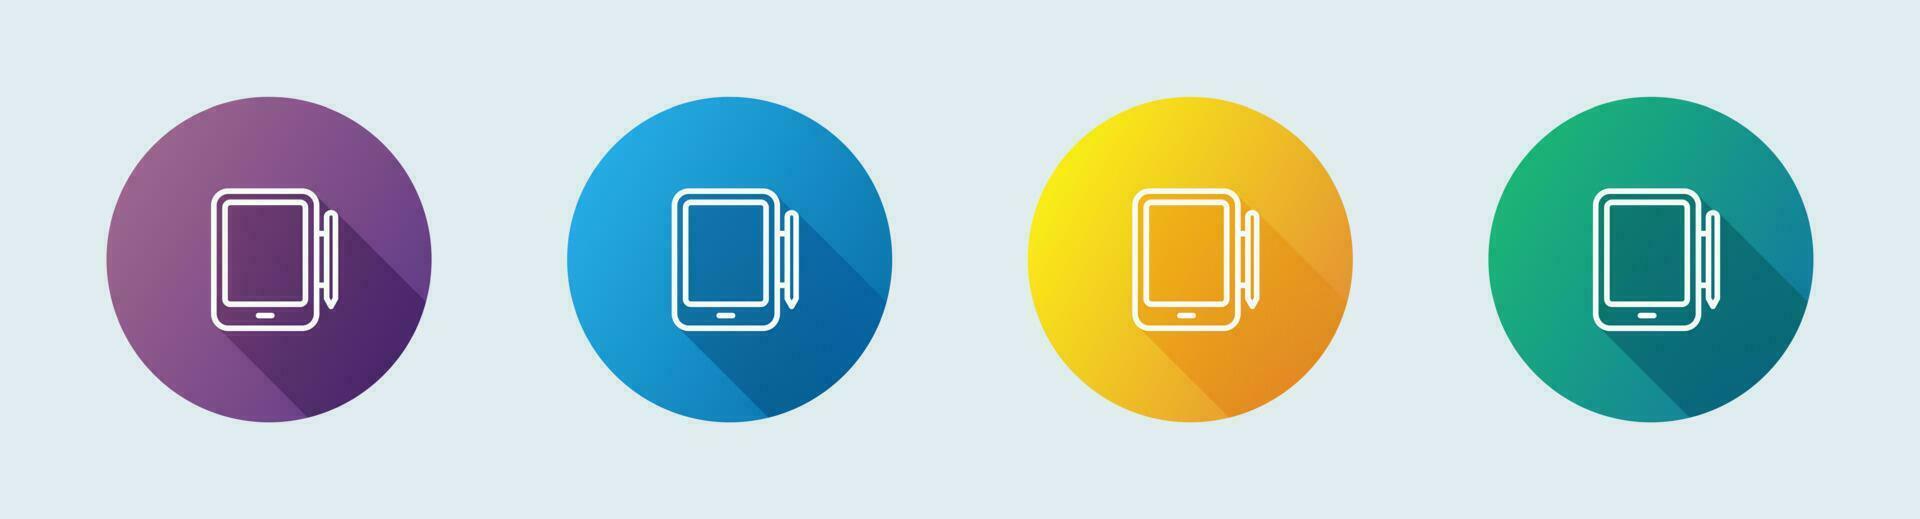 Tablet line icon in flat design style. Device signs vector illustration.